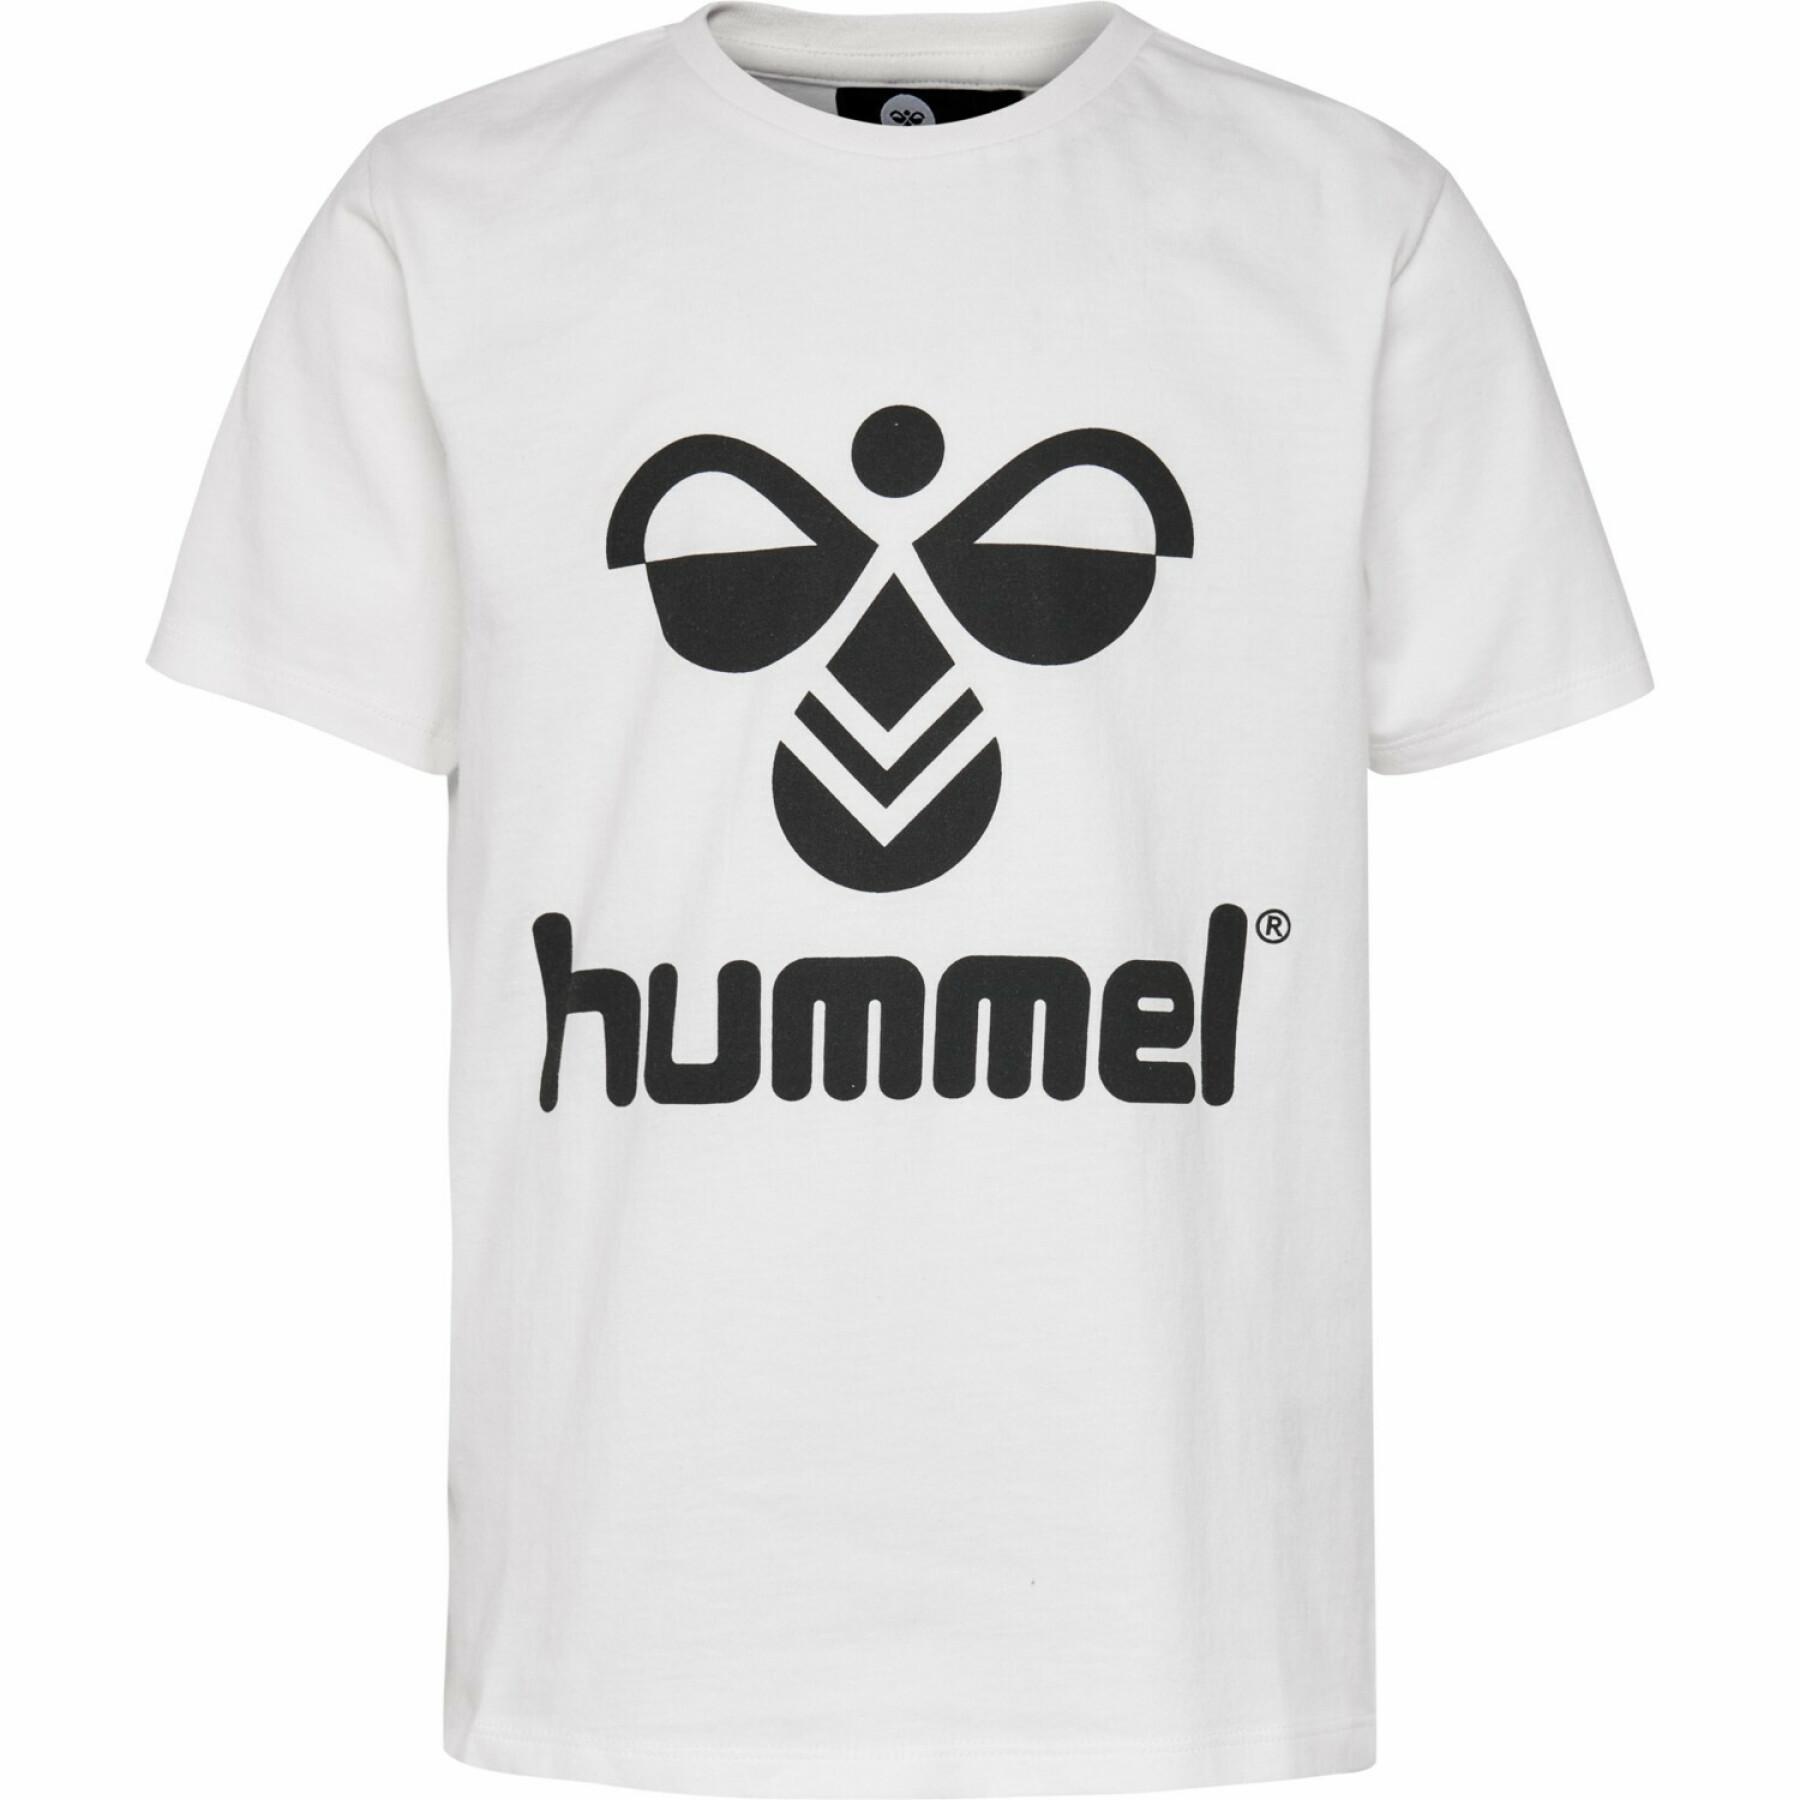 Kid\'s T-shirt Hummel hmltres polo Volleyball - wear T-shirts shirts - Women\'s volleyball et - wear